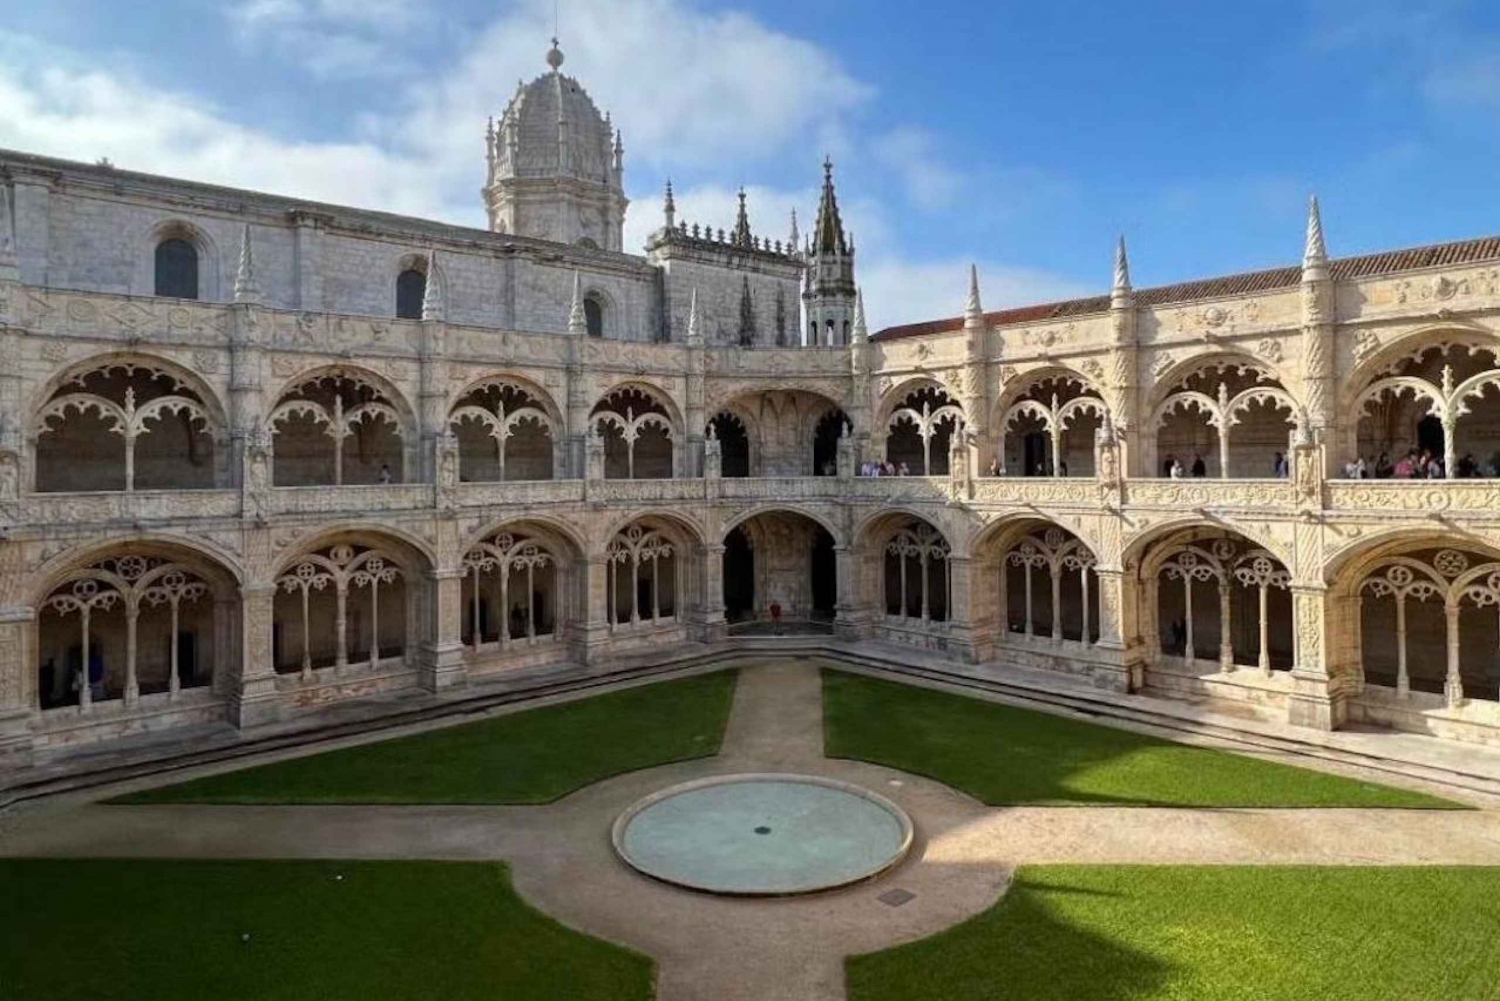 Lisbon: Tour of Belem and Jerónimos Monastery